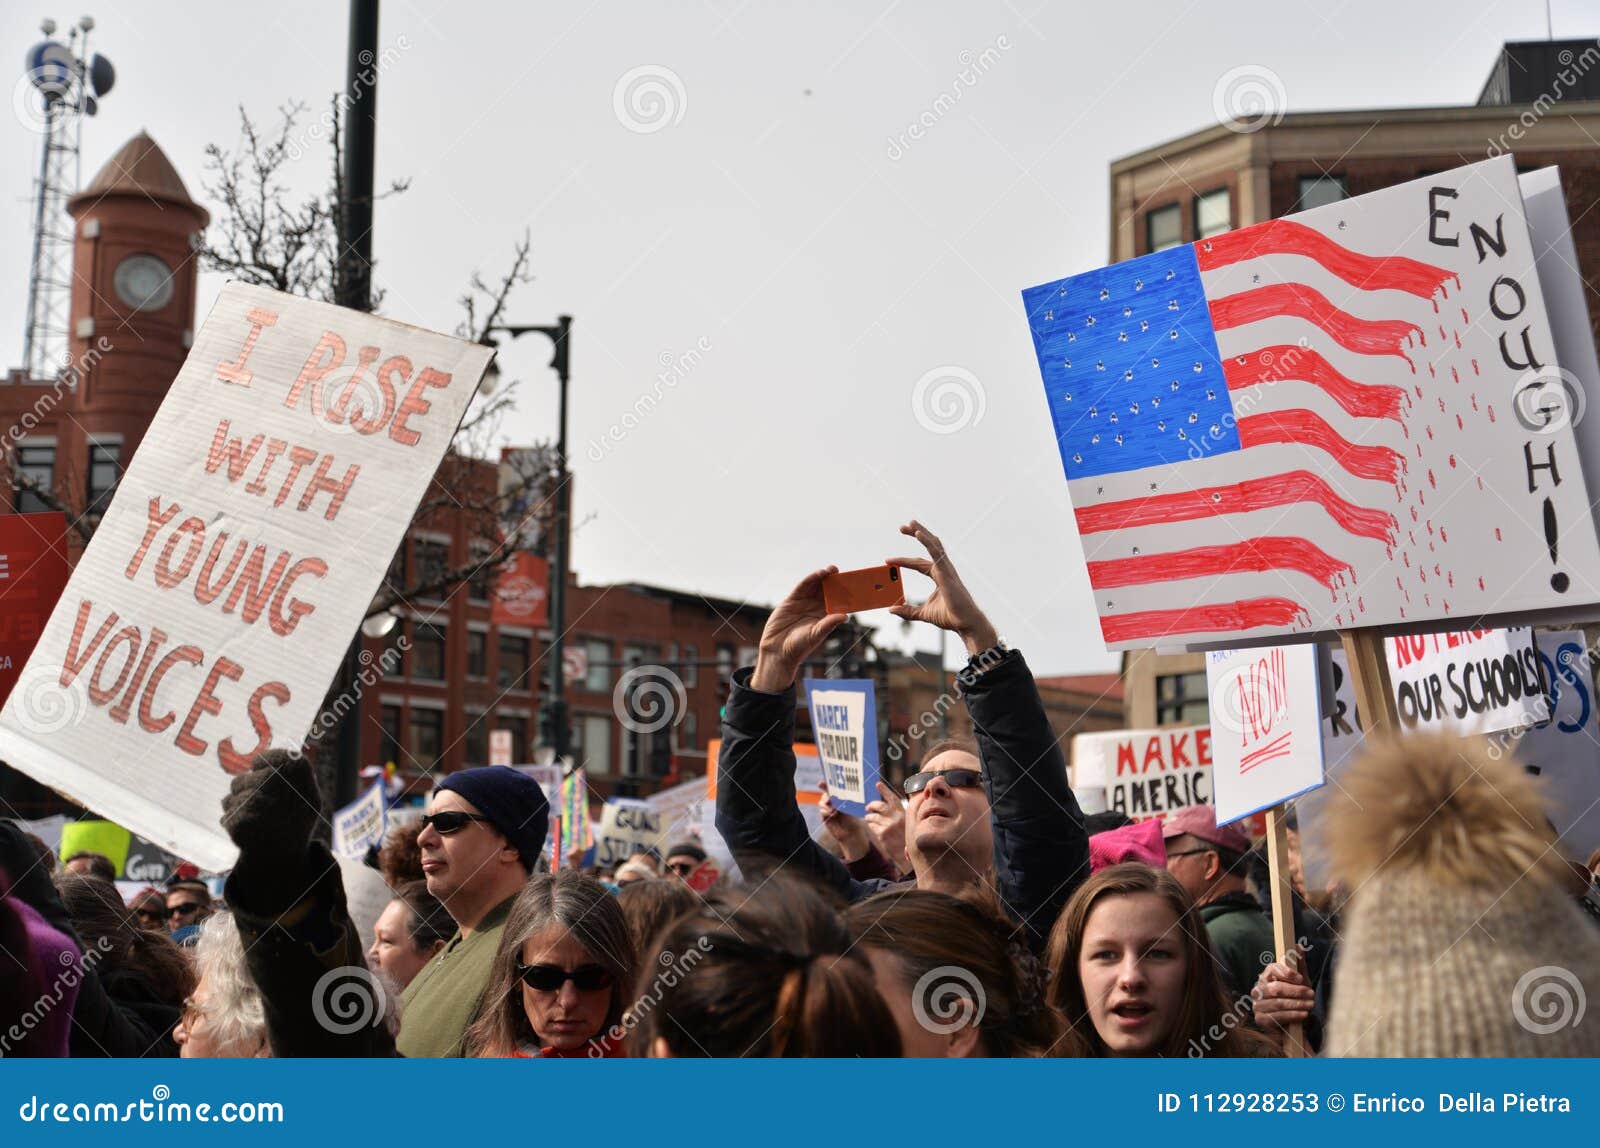 National School Walkout Student Protester Holding Sign. Editorial Stock